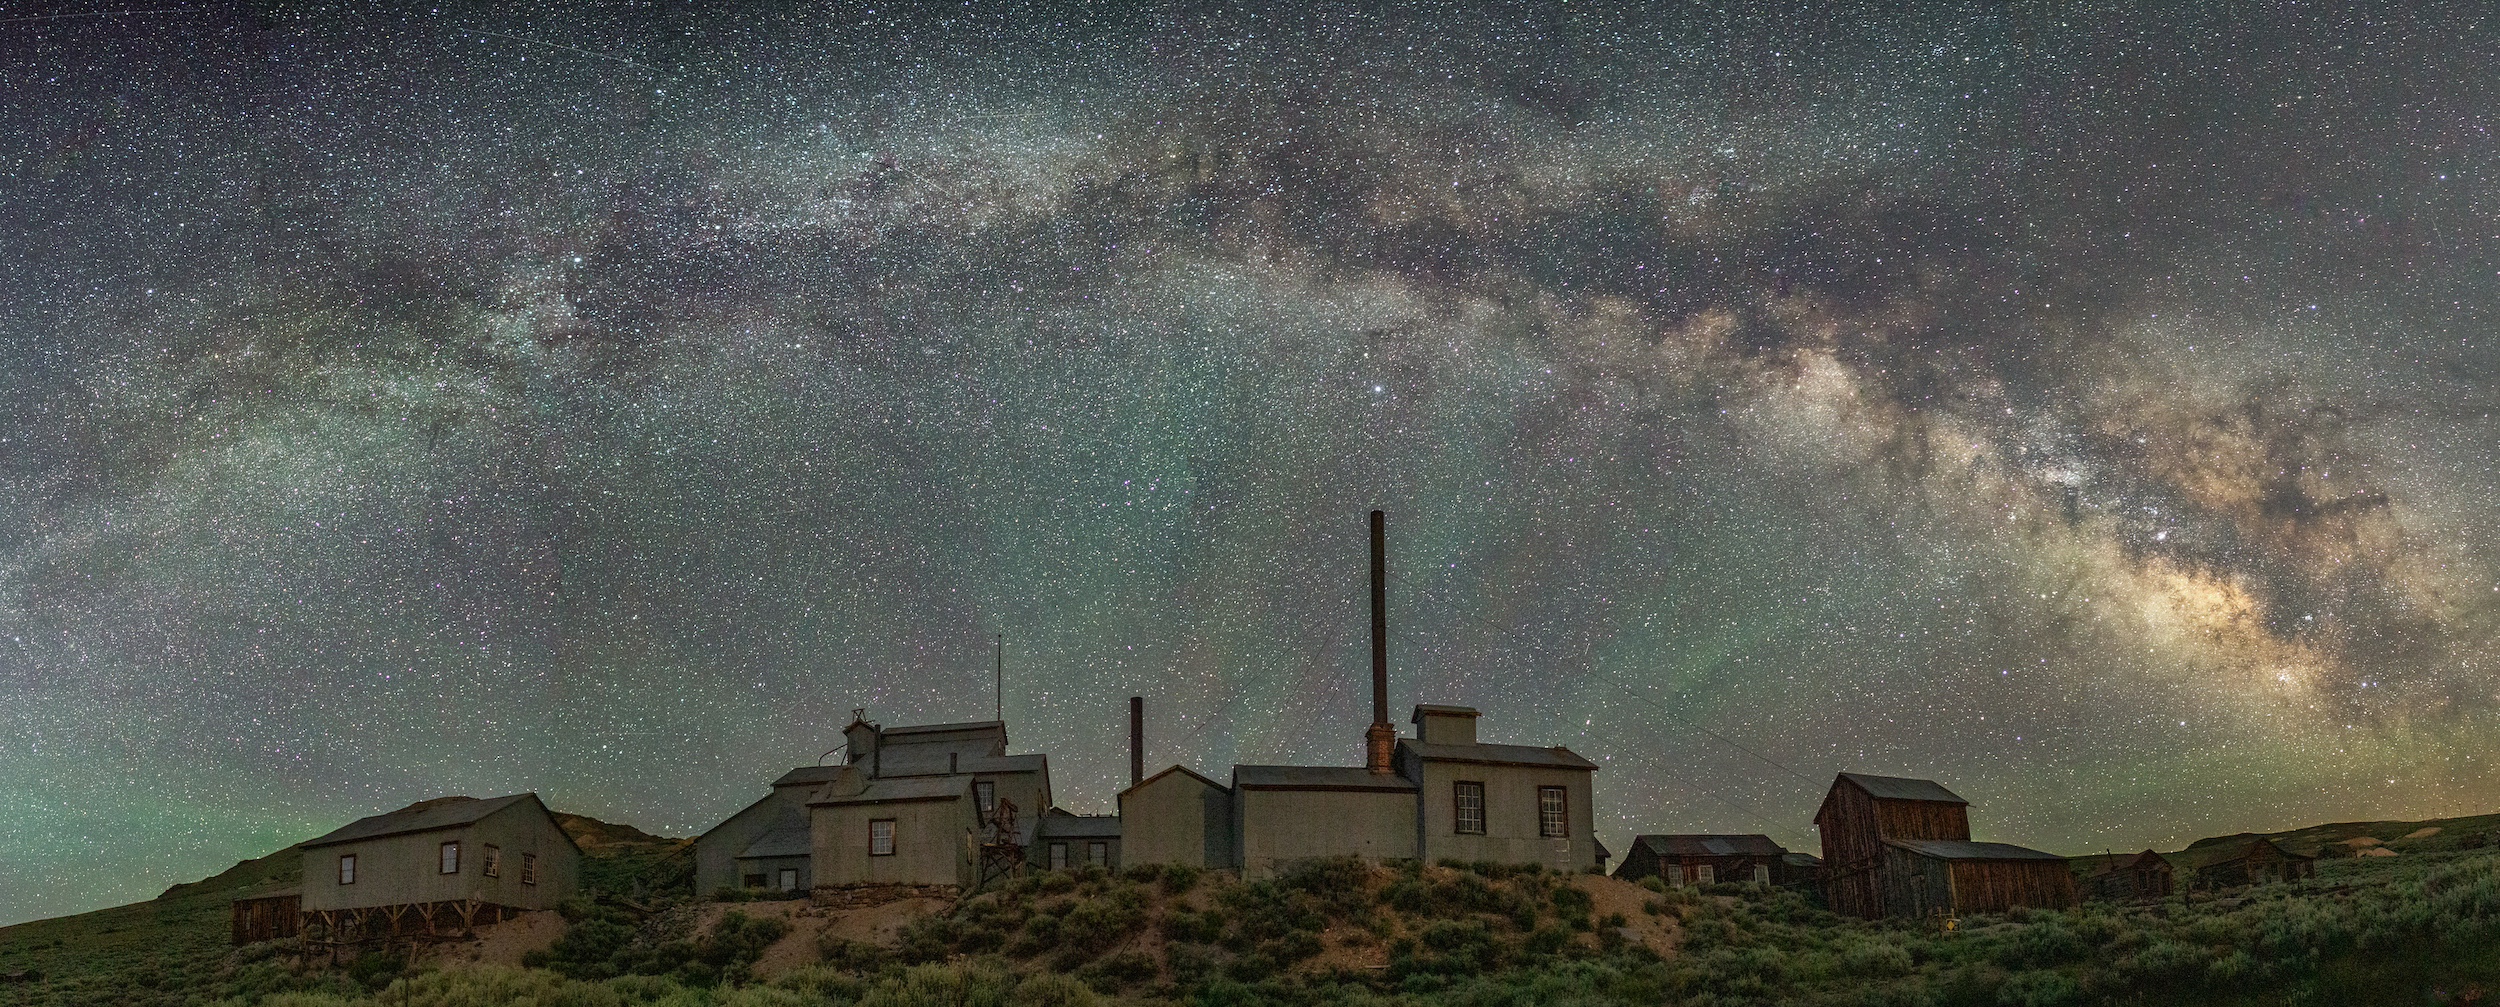 factory smokestacks under a starry night sky crossed by a vivid Milky Way and streaked with glowing green light